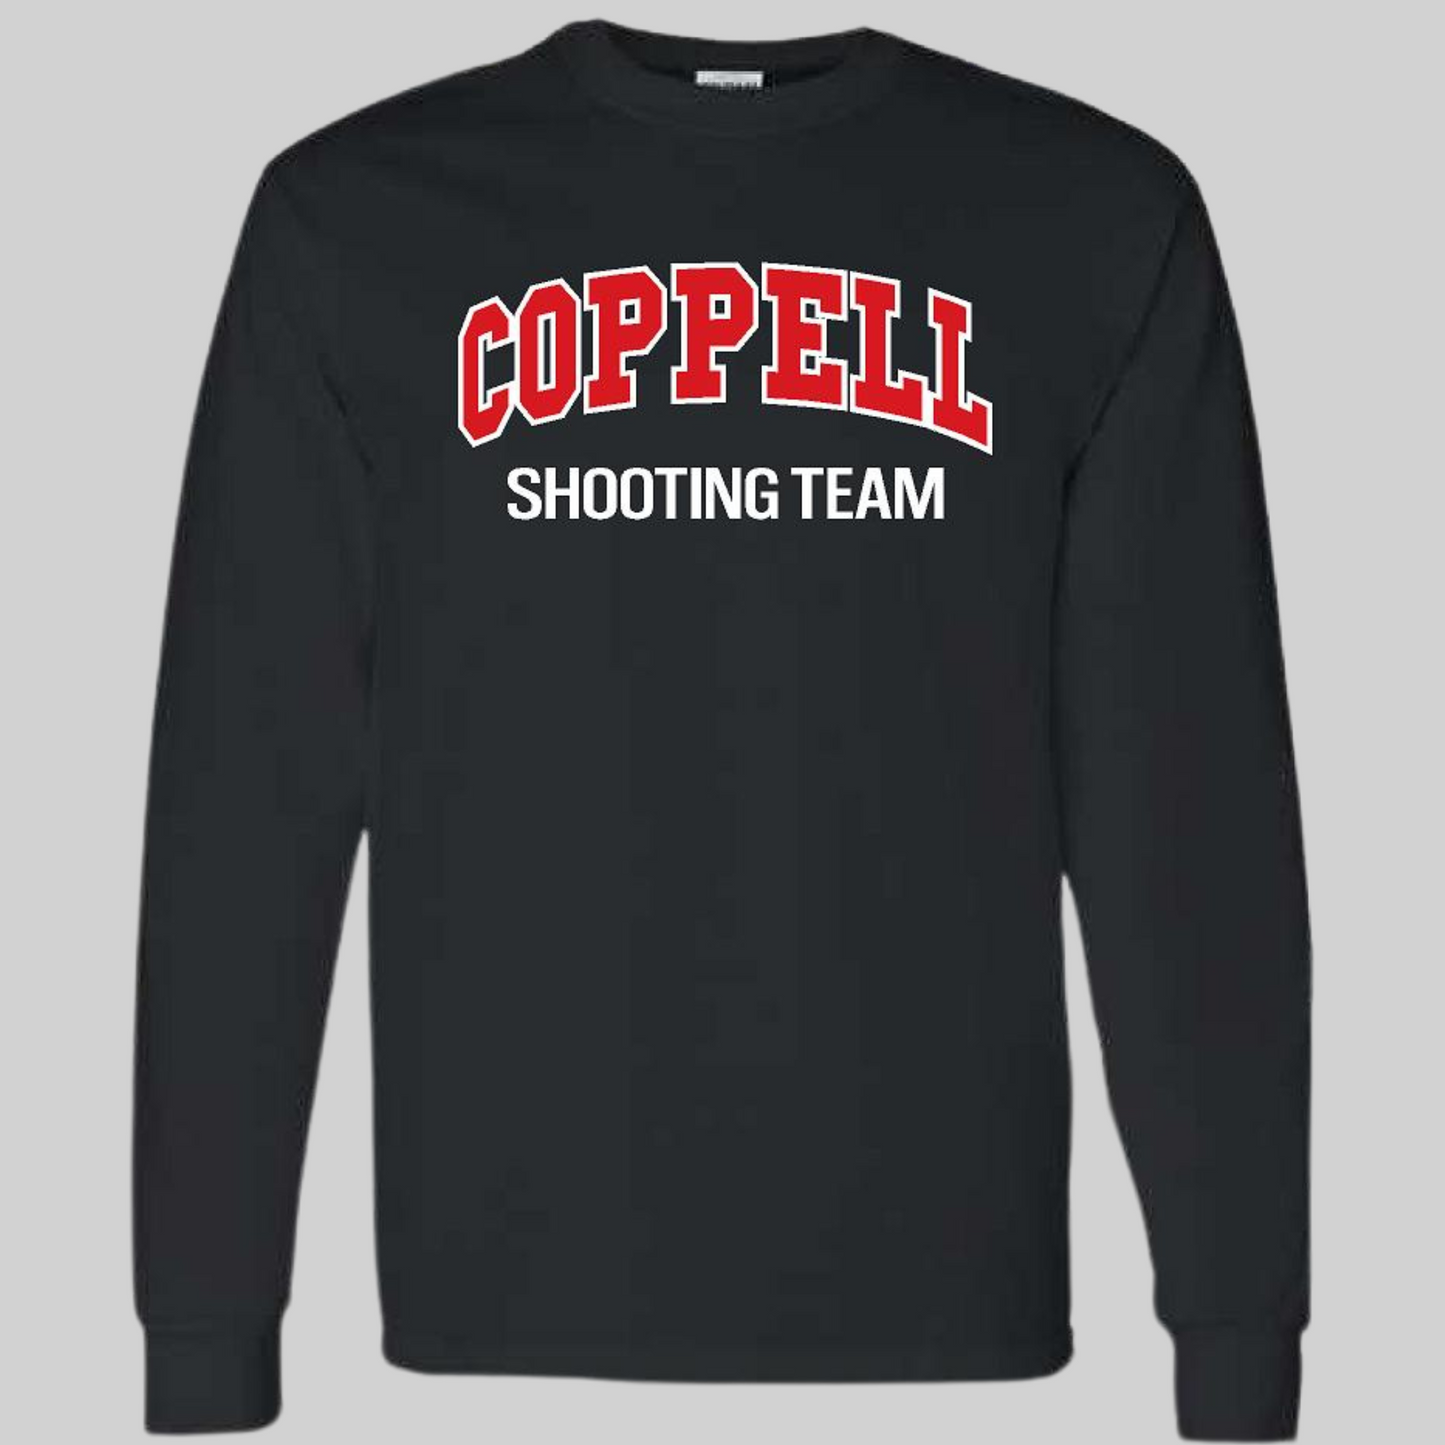 Coppell High School Competitive Shooting Team 23-4